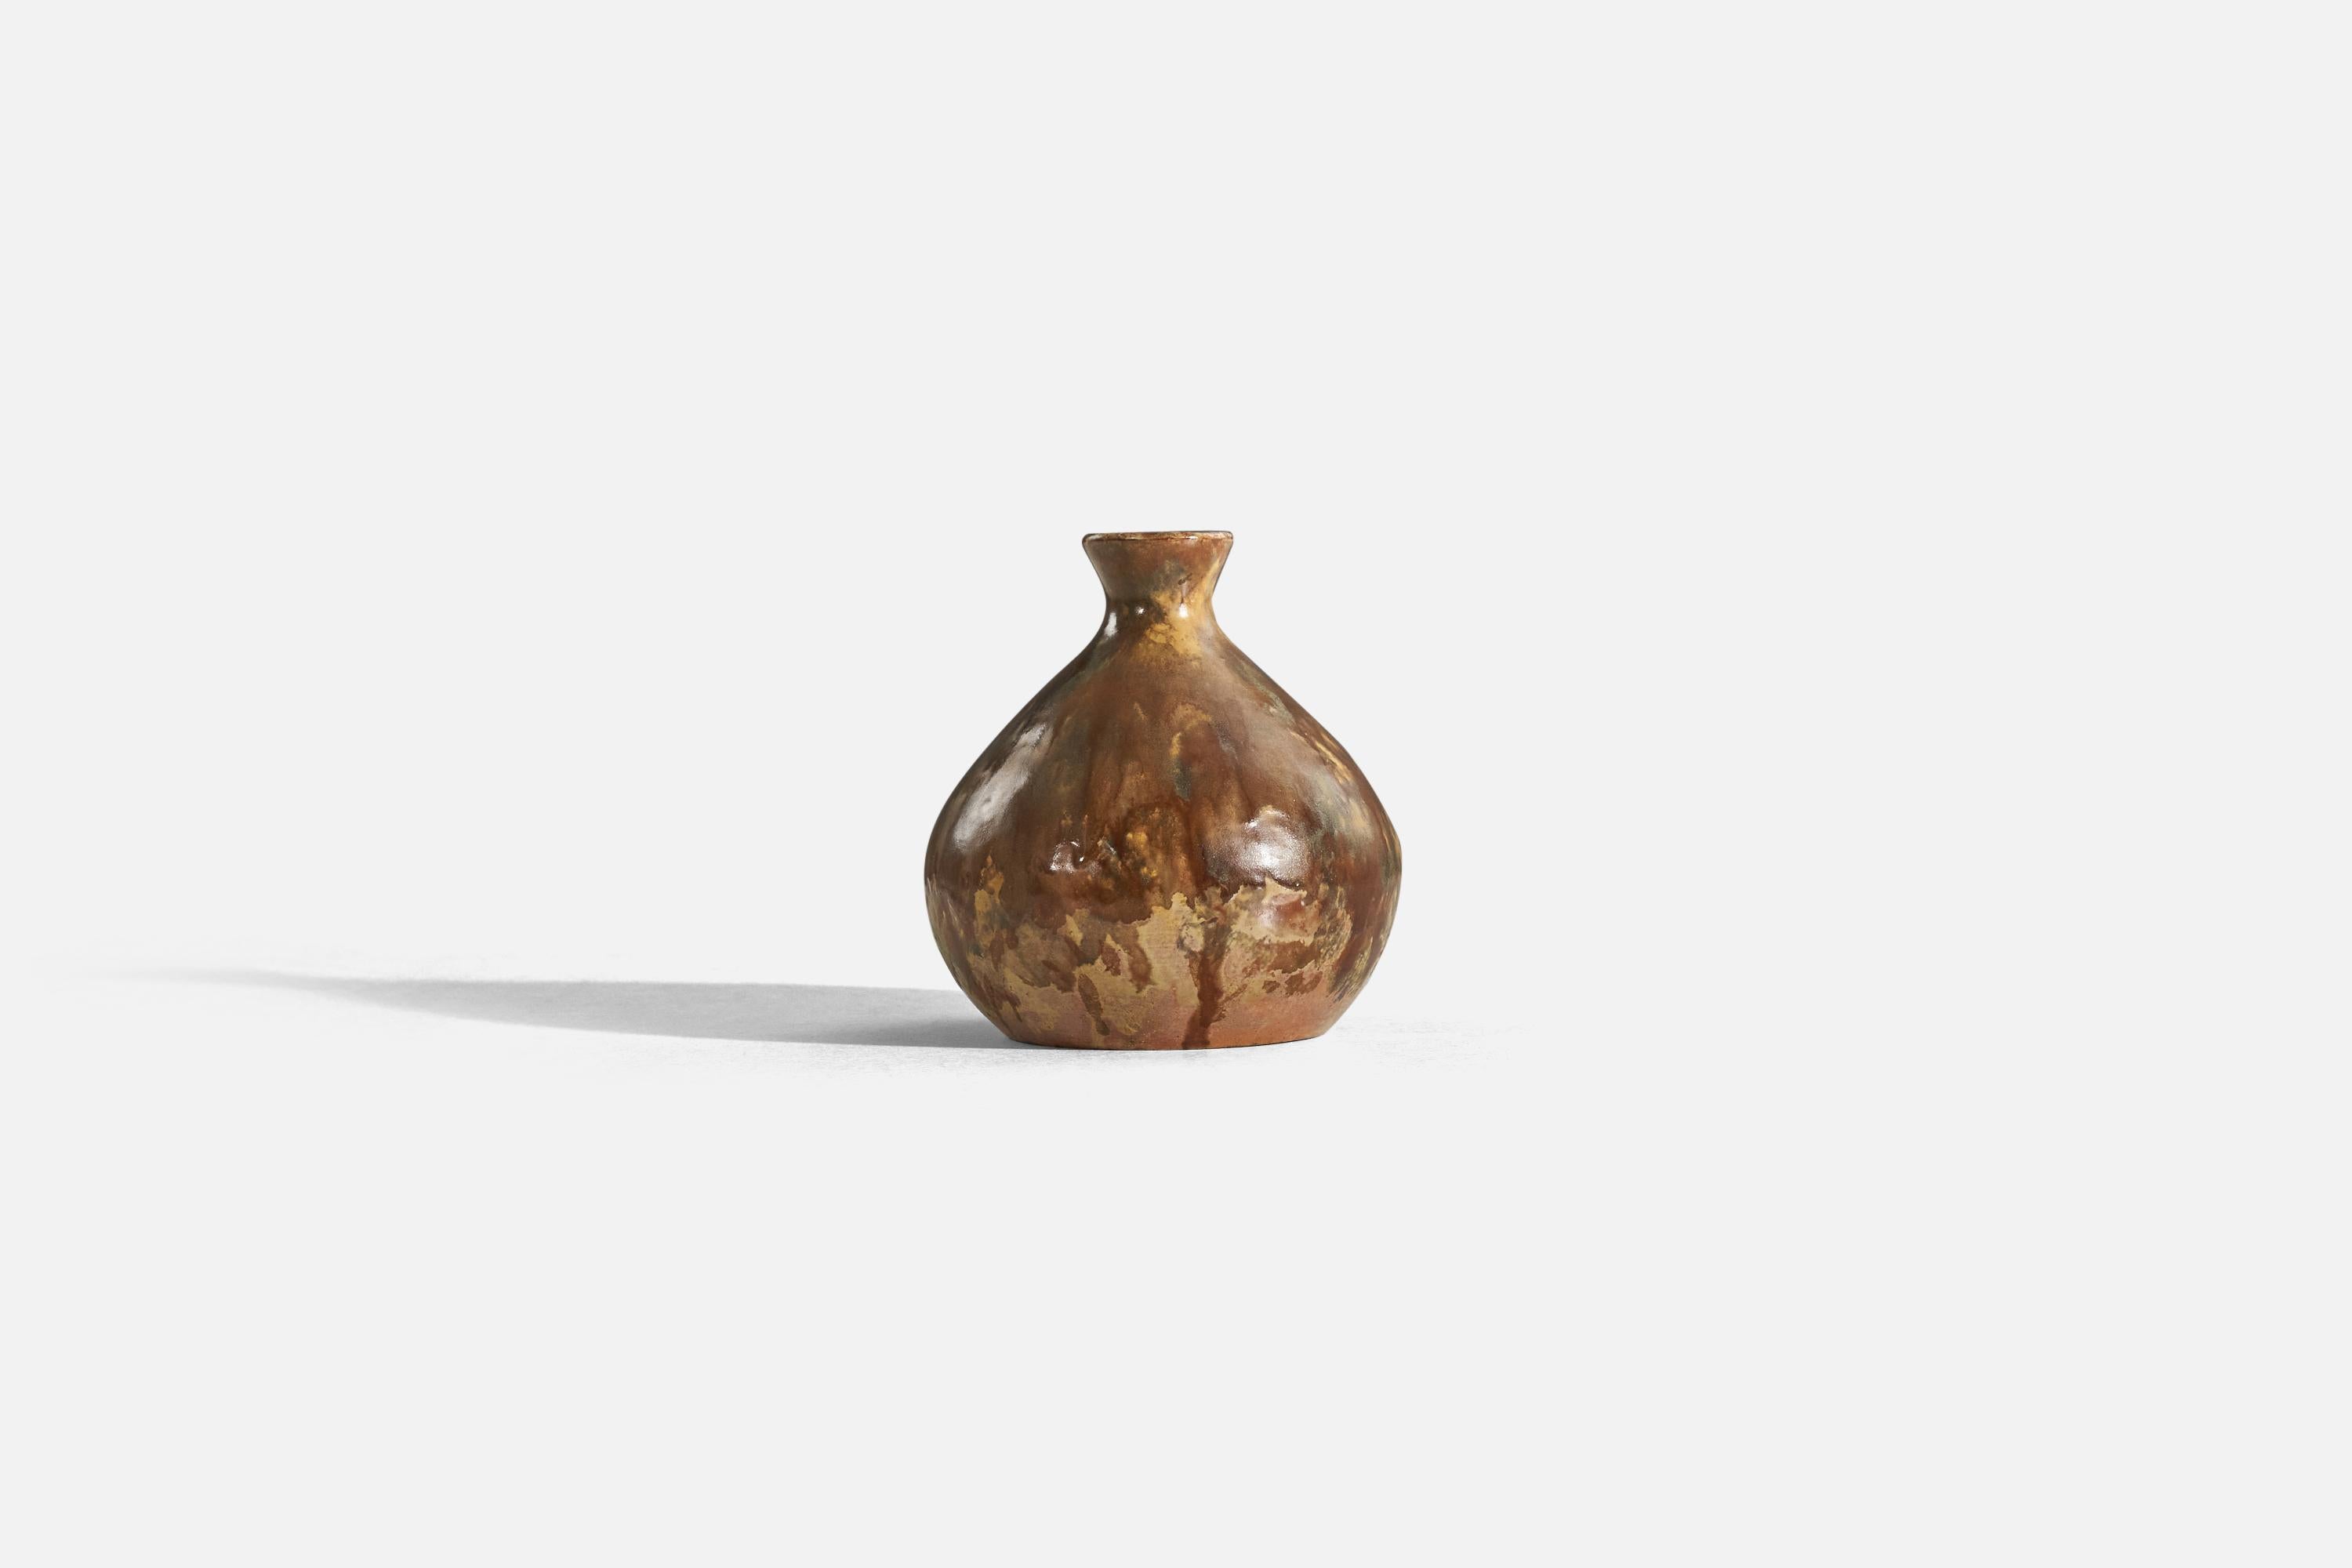 A brown, glazed stoneware vase designed and produced by Andersson & Johansson, Höganäs, Sweden, c. 1920s.